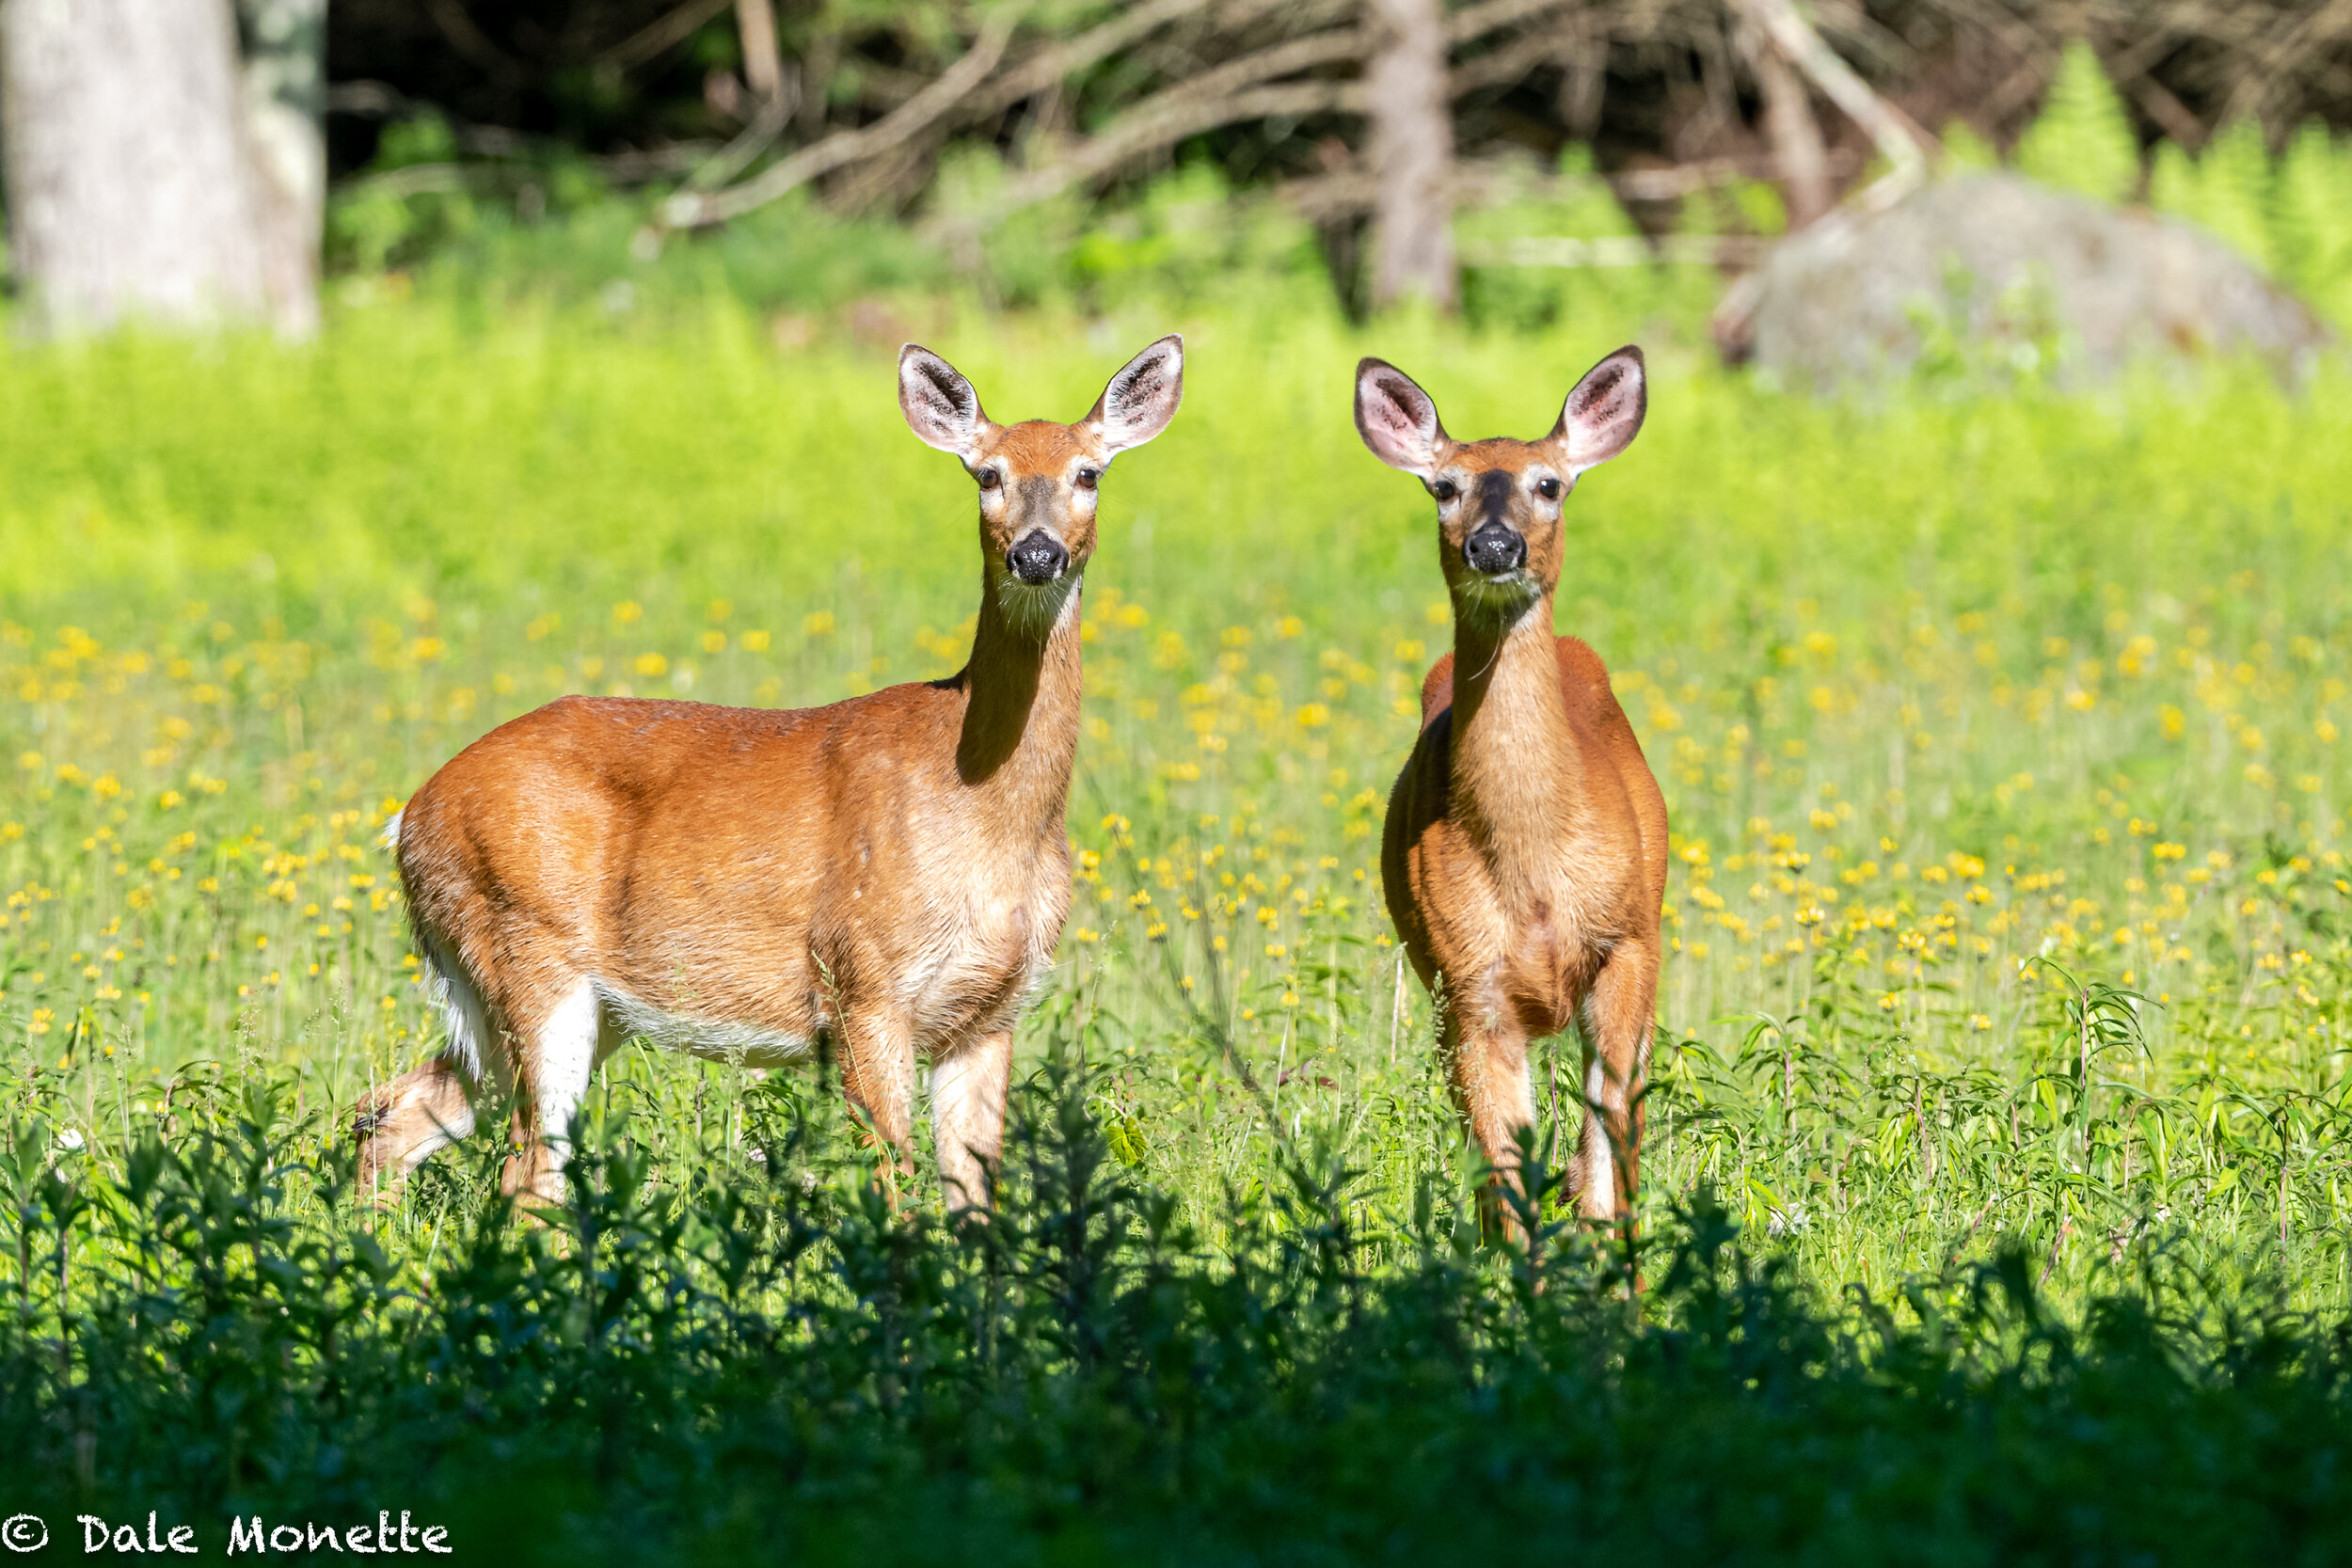   The deer on the right is the pregnant one…..  